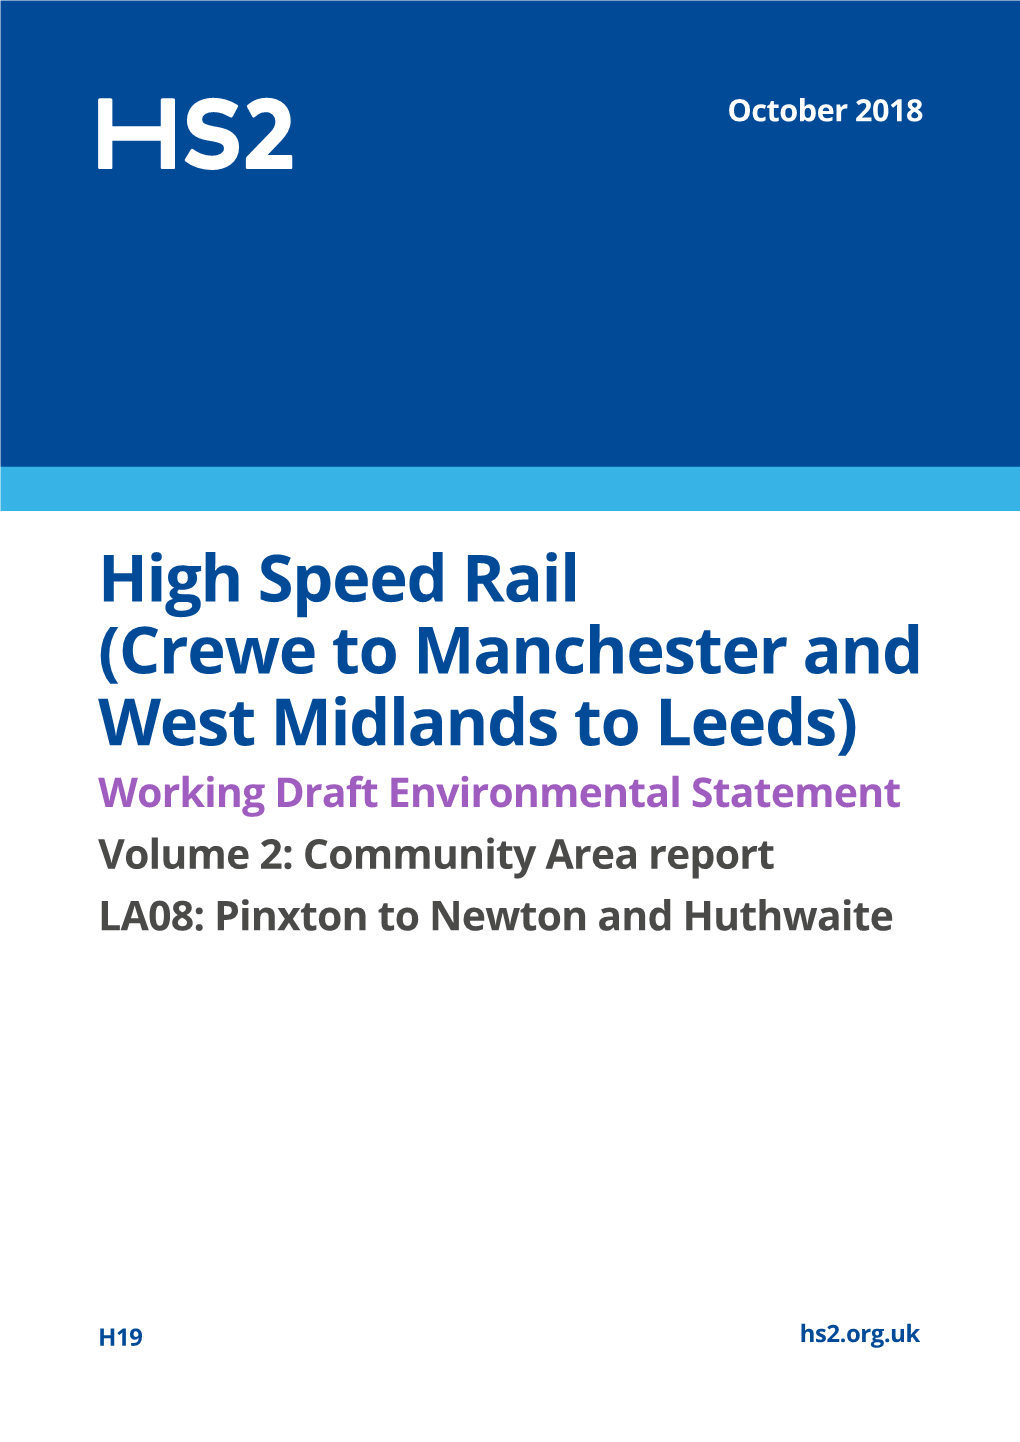 High Speed Rail (Crewe to Manchester and West Midlands to Leeds) Working Draft Environmental Statement Volume 2: Community Area Report |